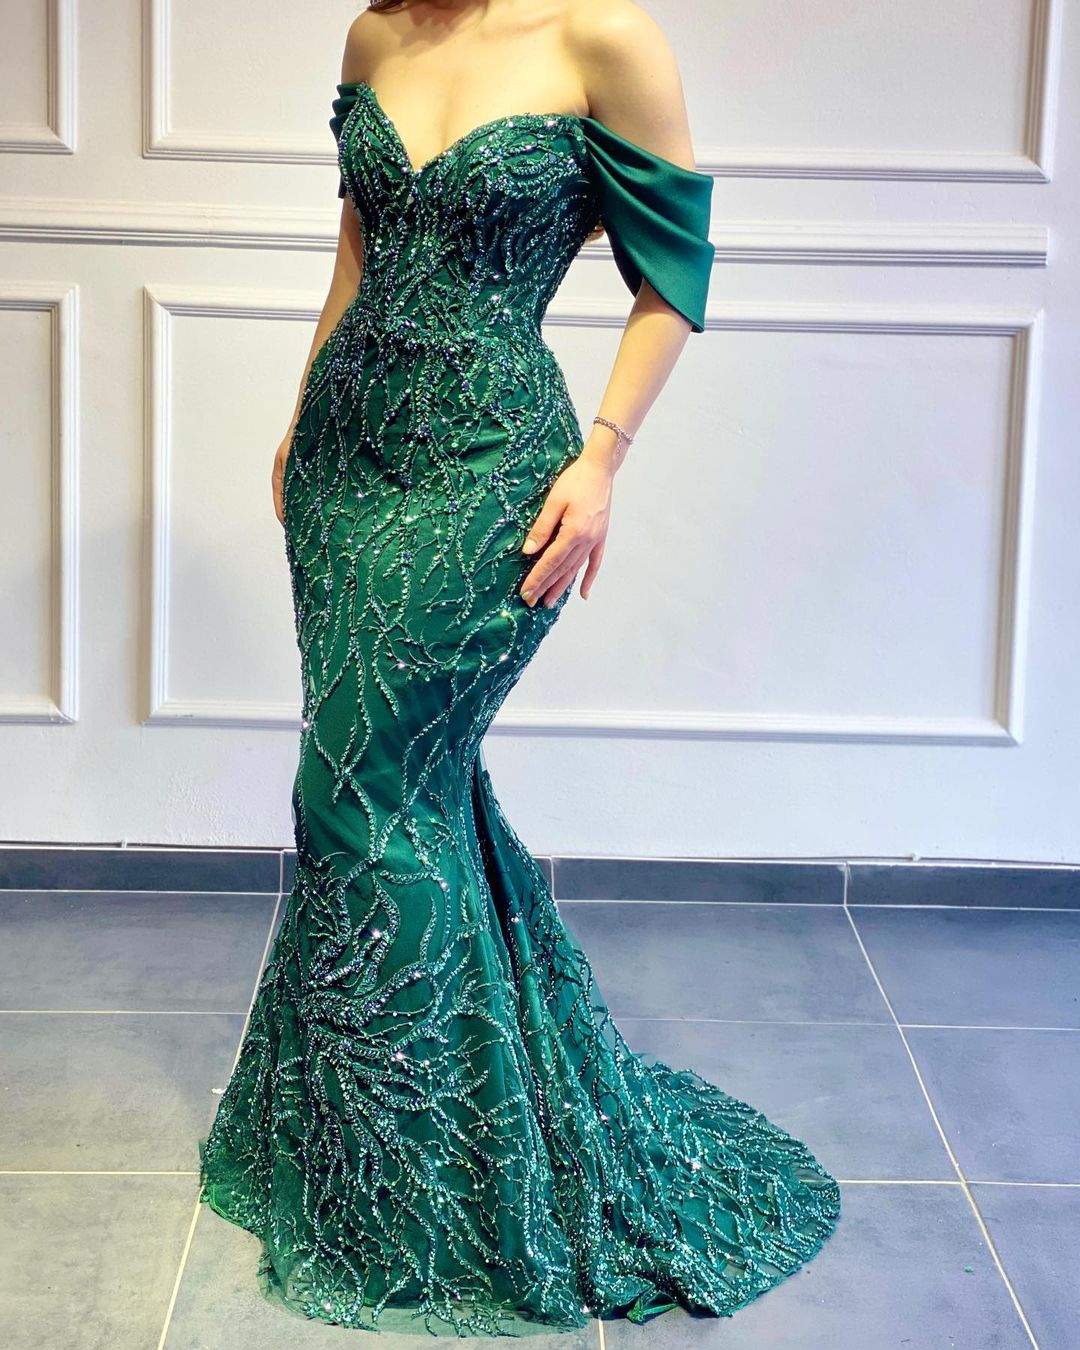 OSTTY - Green Cape Long Sleeves Quinceanera Dress OS747 $899.99